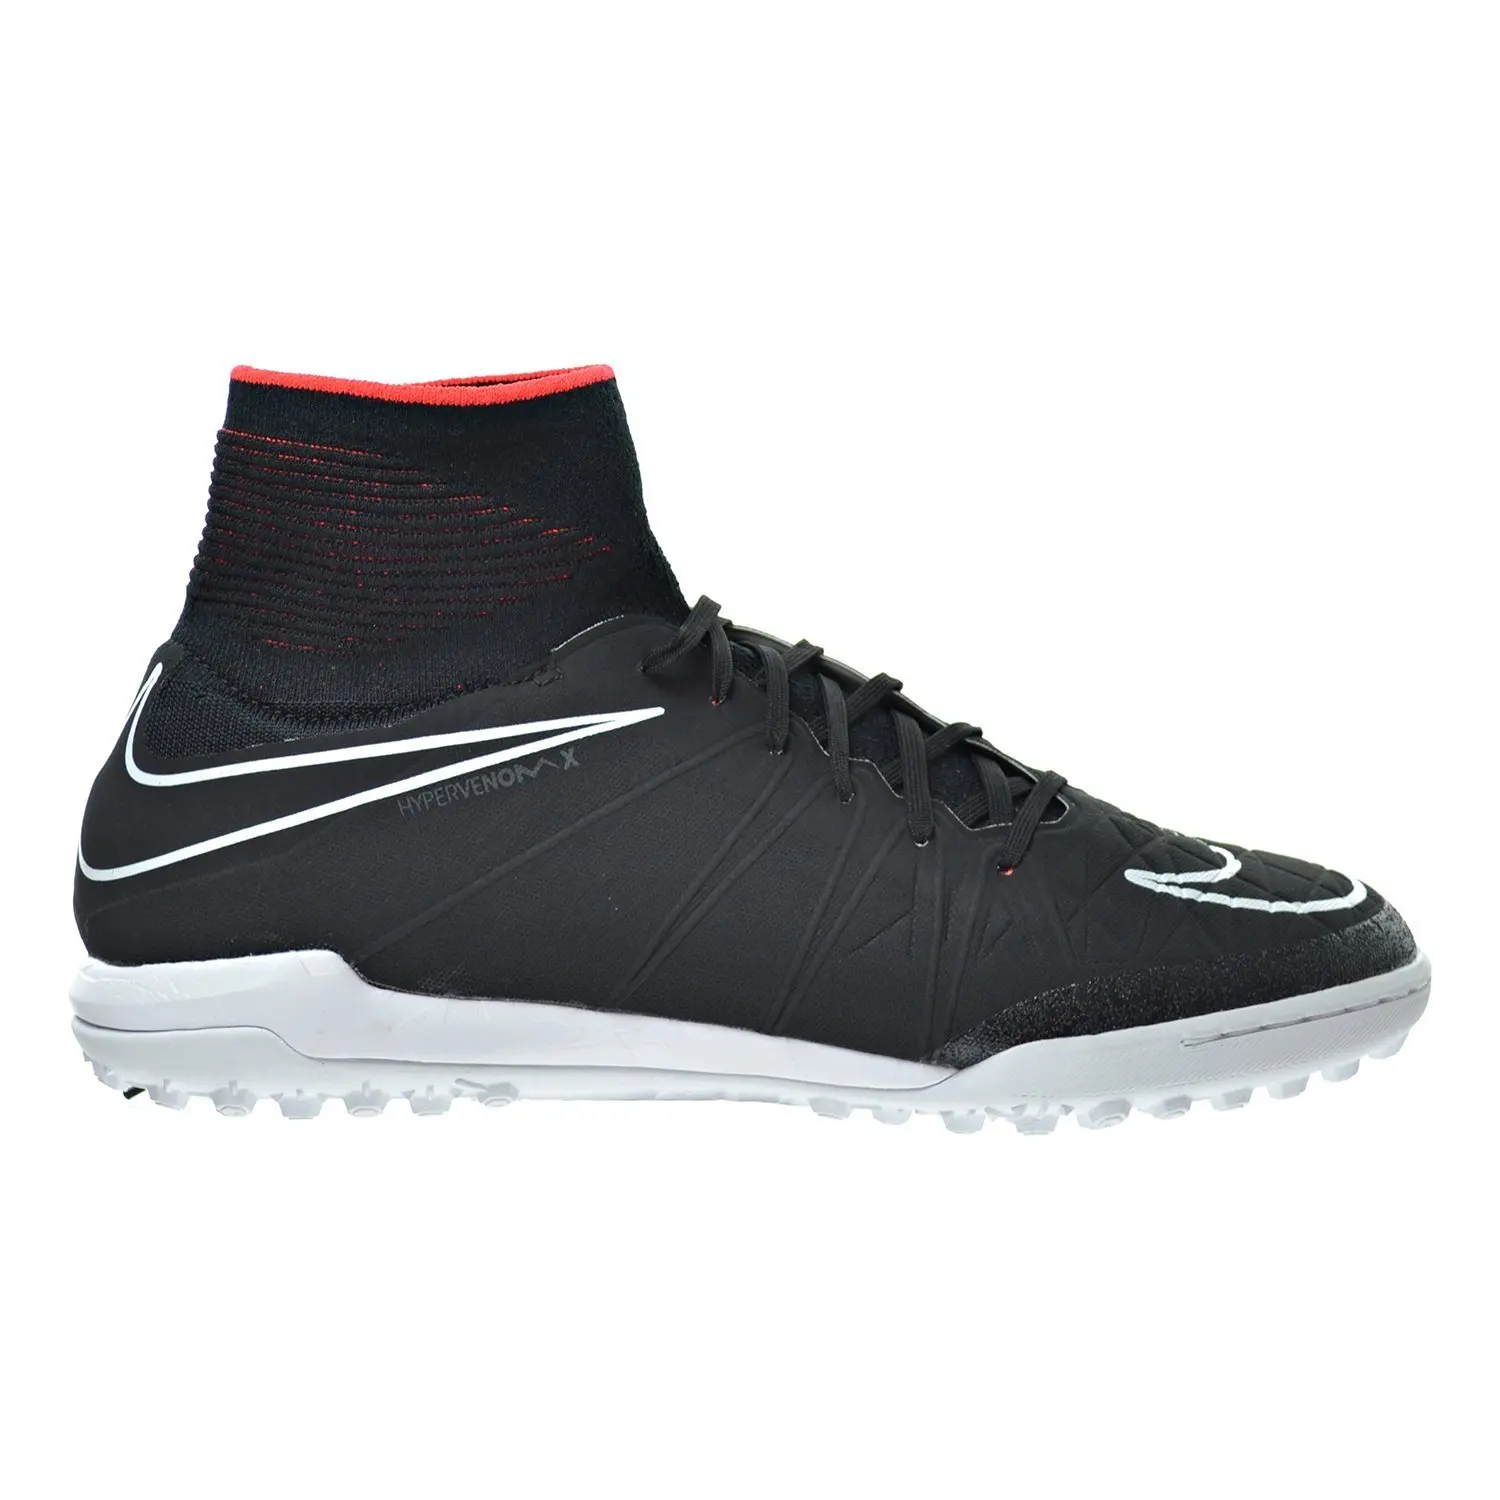 Cheap Nike Soccer Turf Find Nike Soccer Turf Deals On Line At Alibaba Com